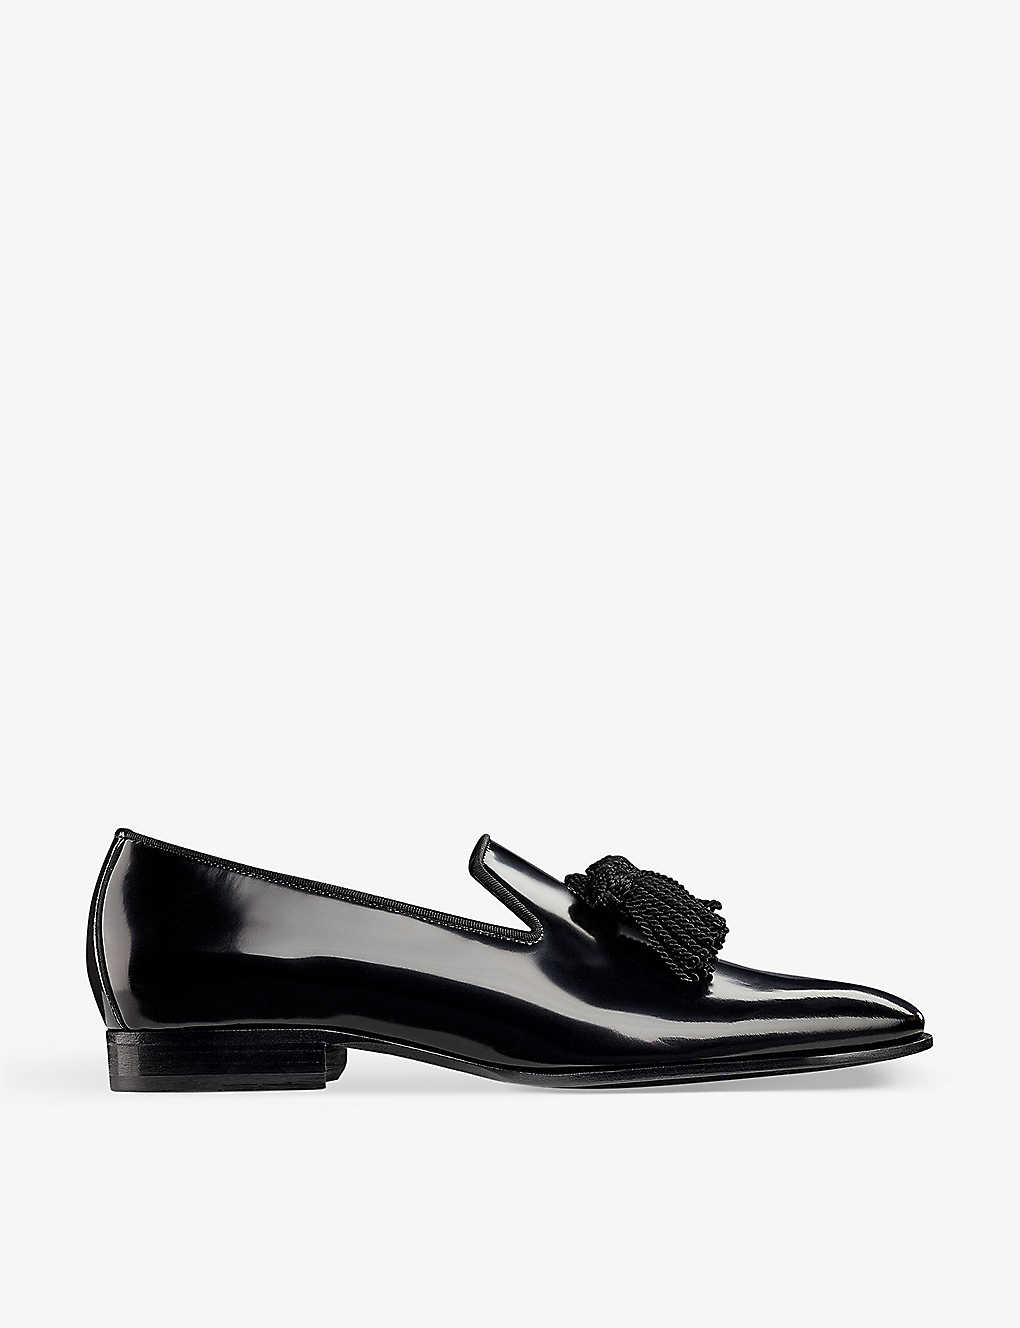 Shop Jimmy Choo Women's Black Foxley Tassel Patent-leather Loafers